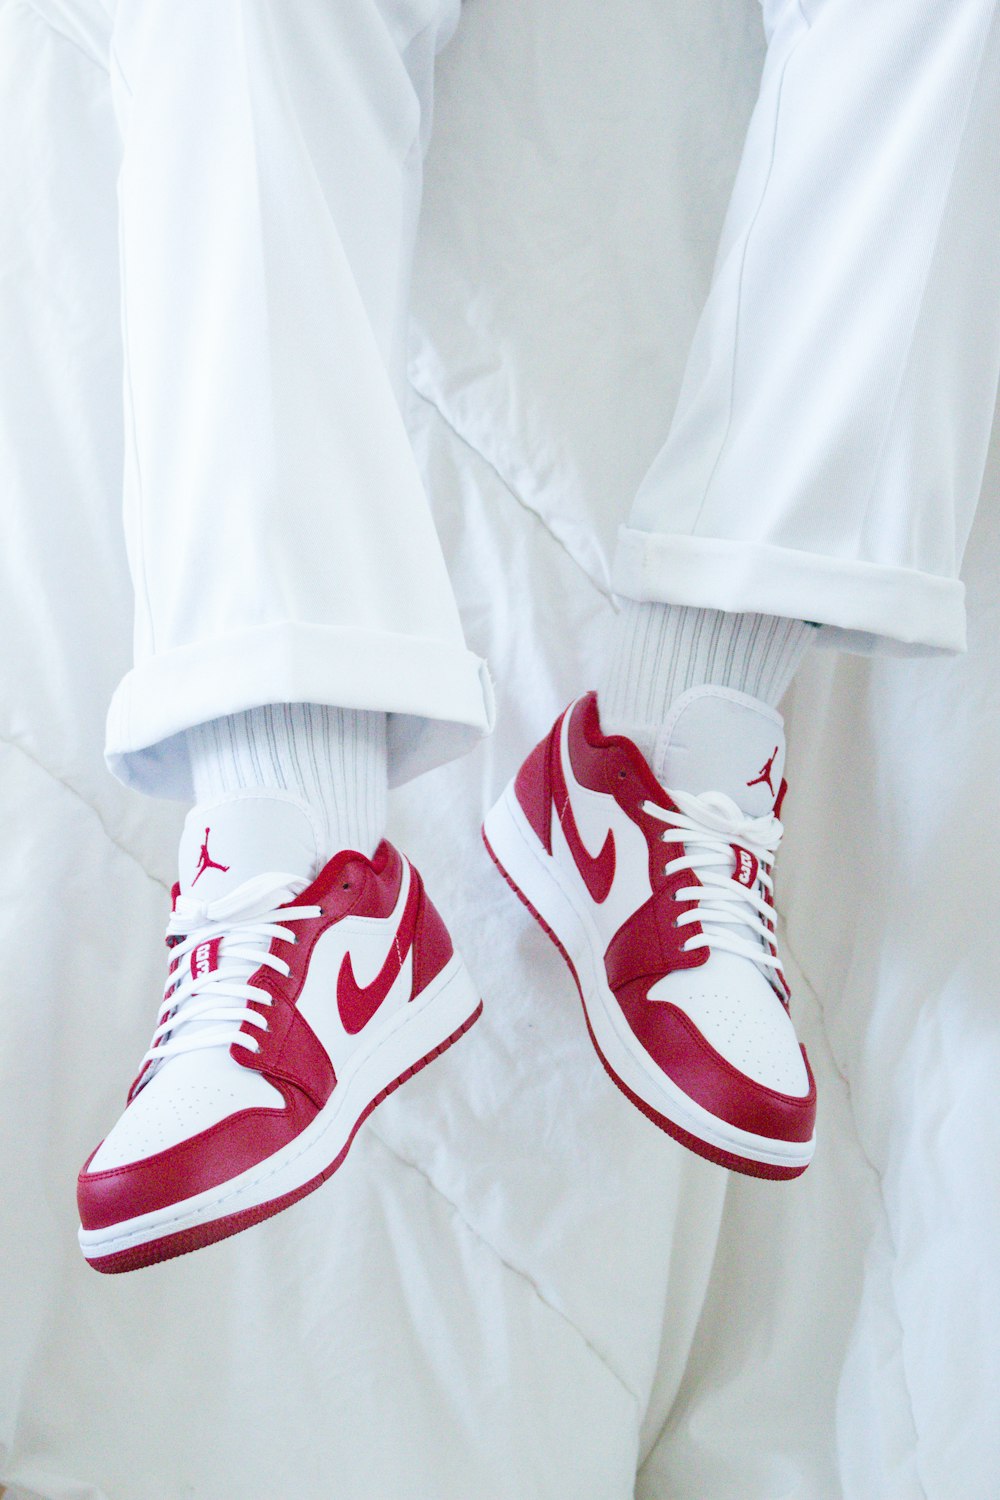 Red and white nike air force 1 low photo – Free Paris Image on Unsplash